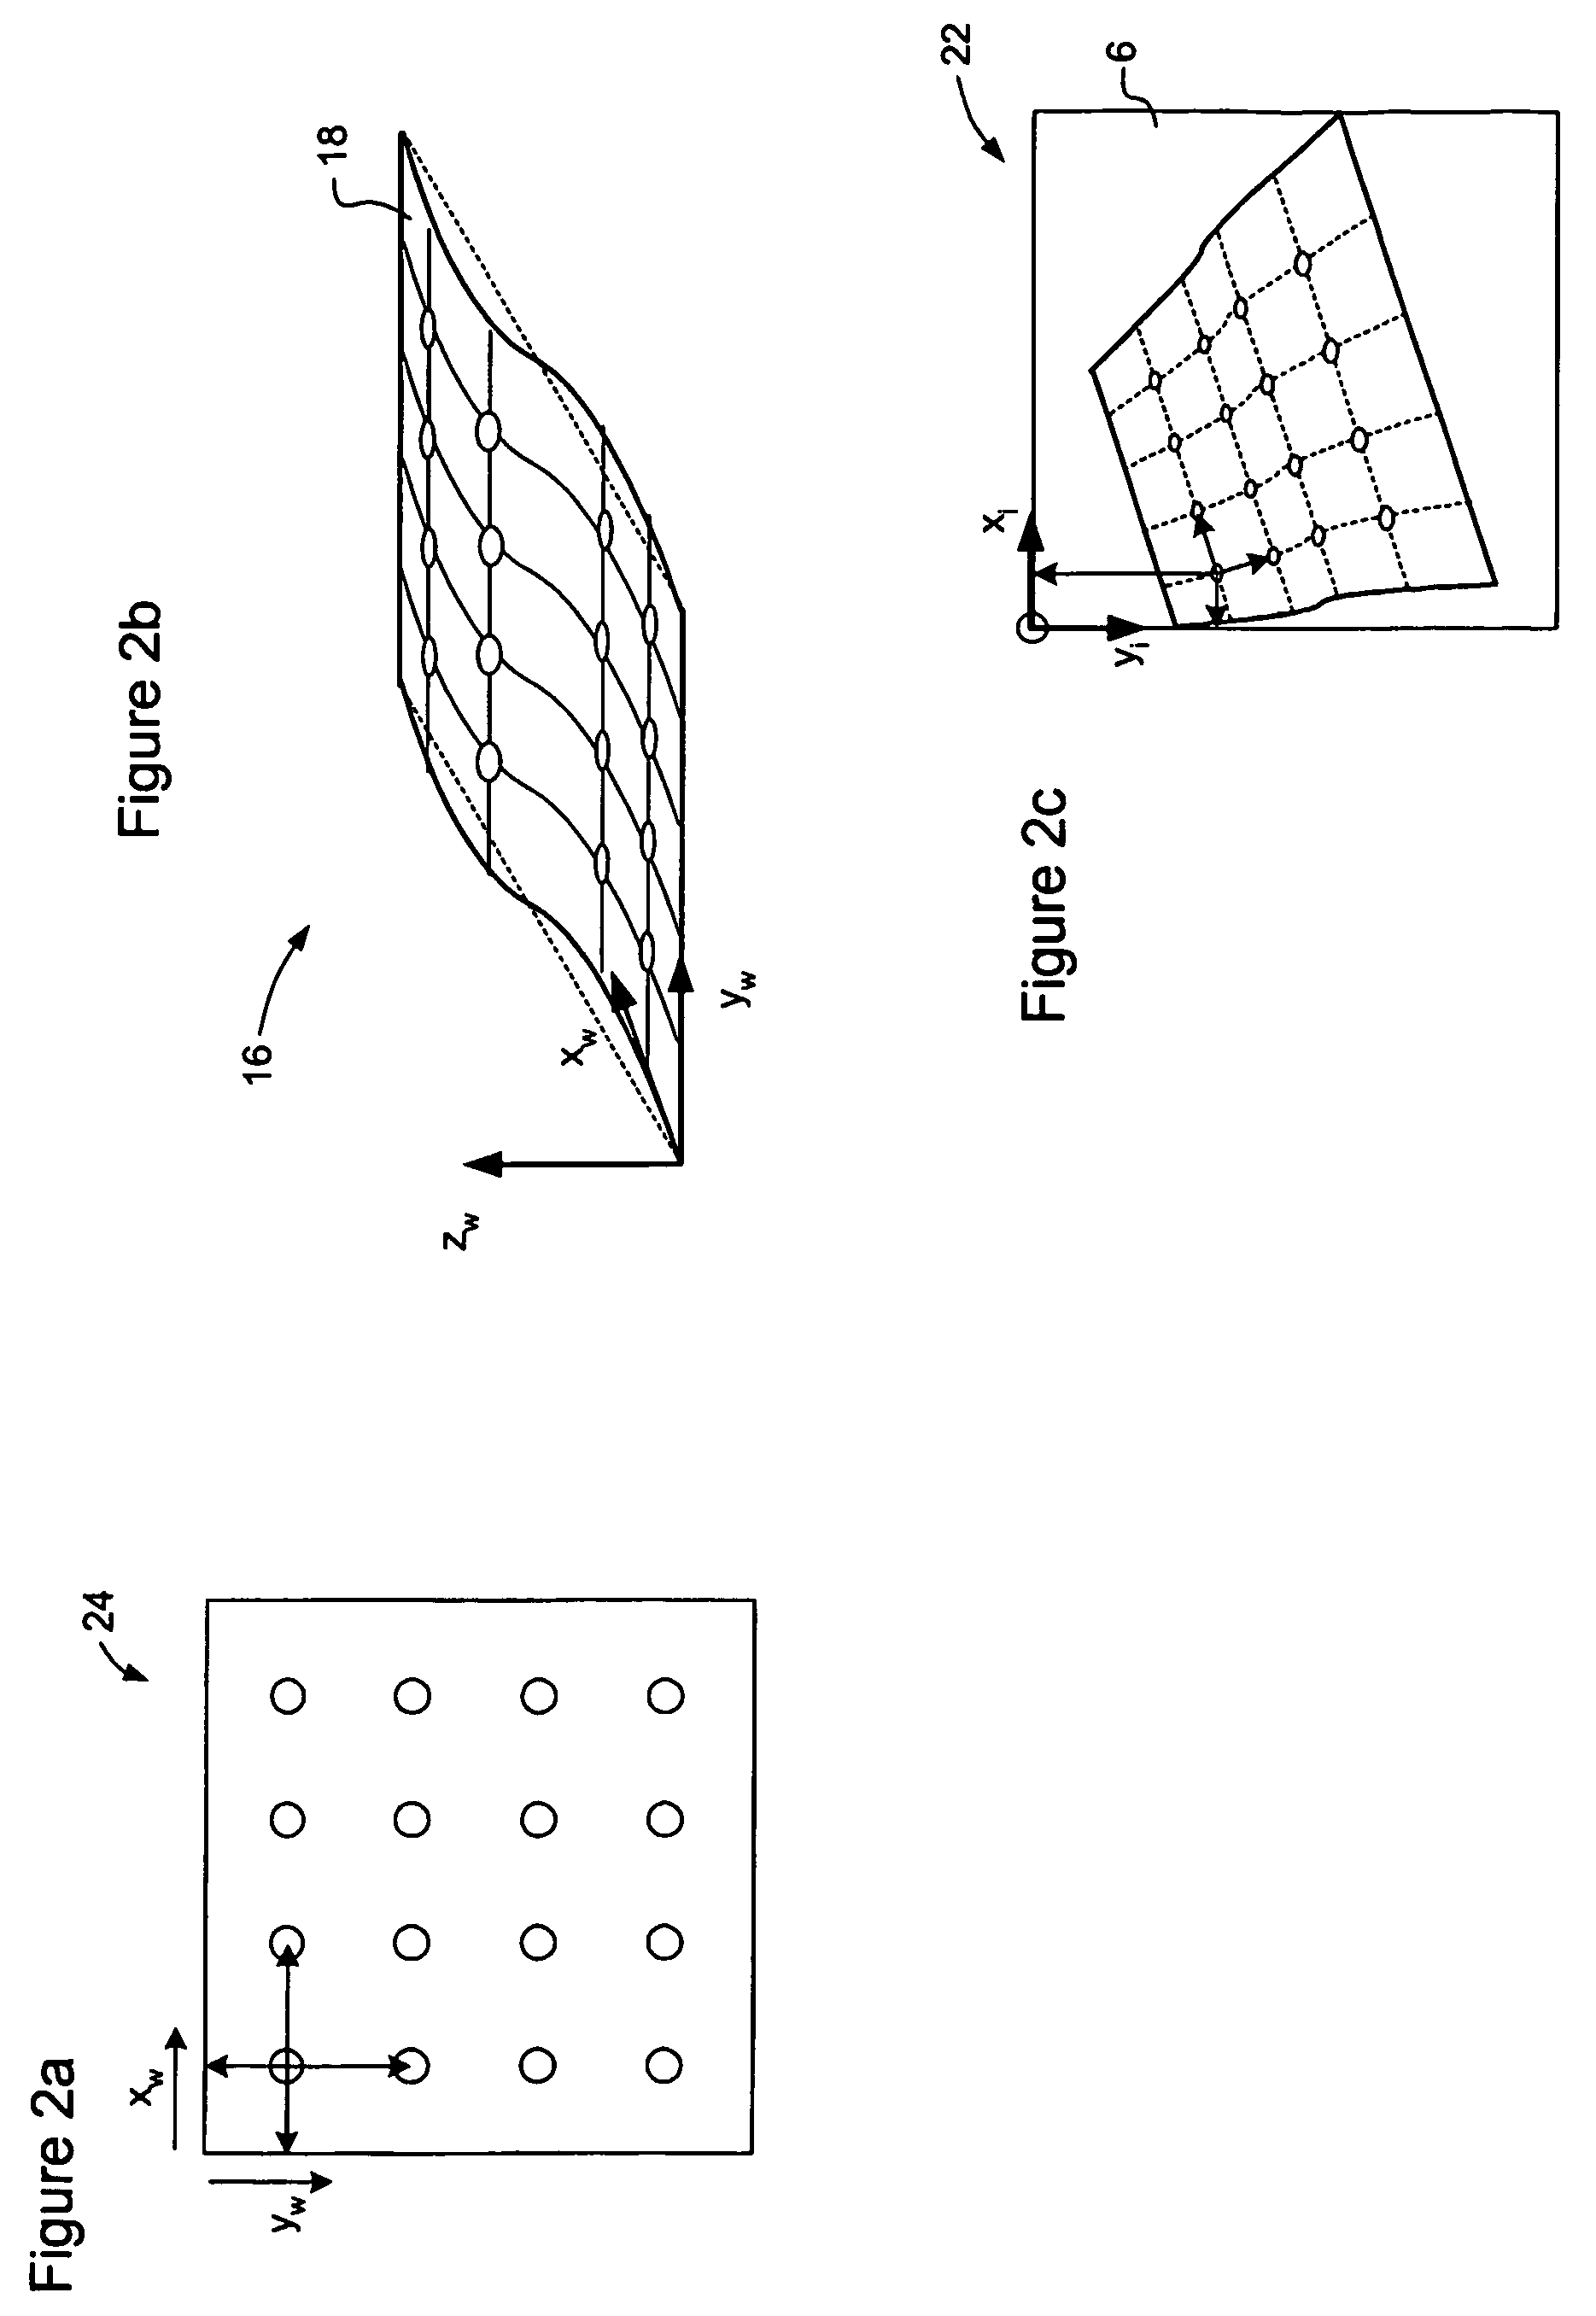 Model-based recognition of objects using a calibrated image system